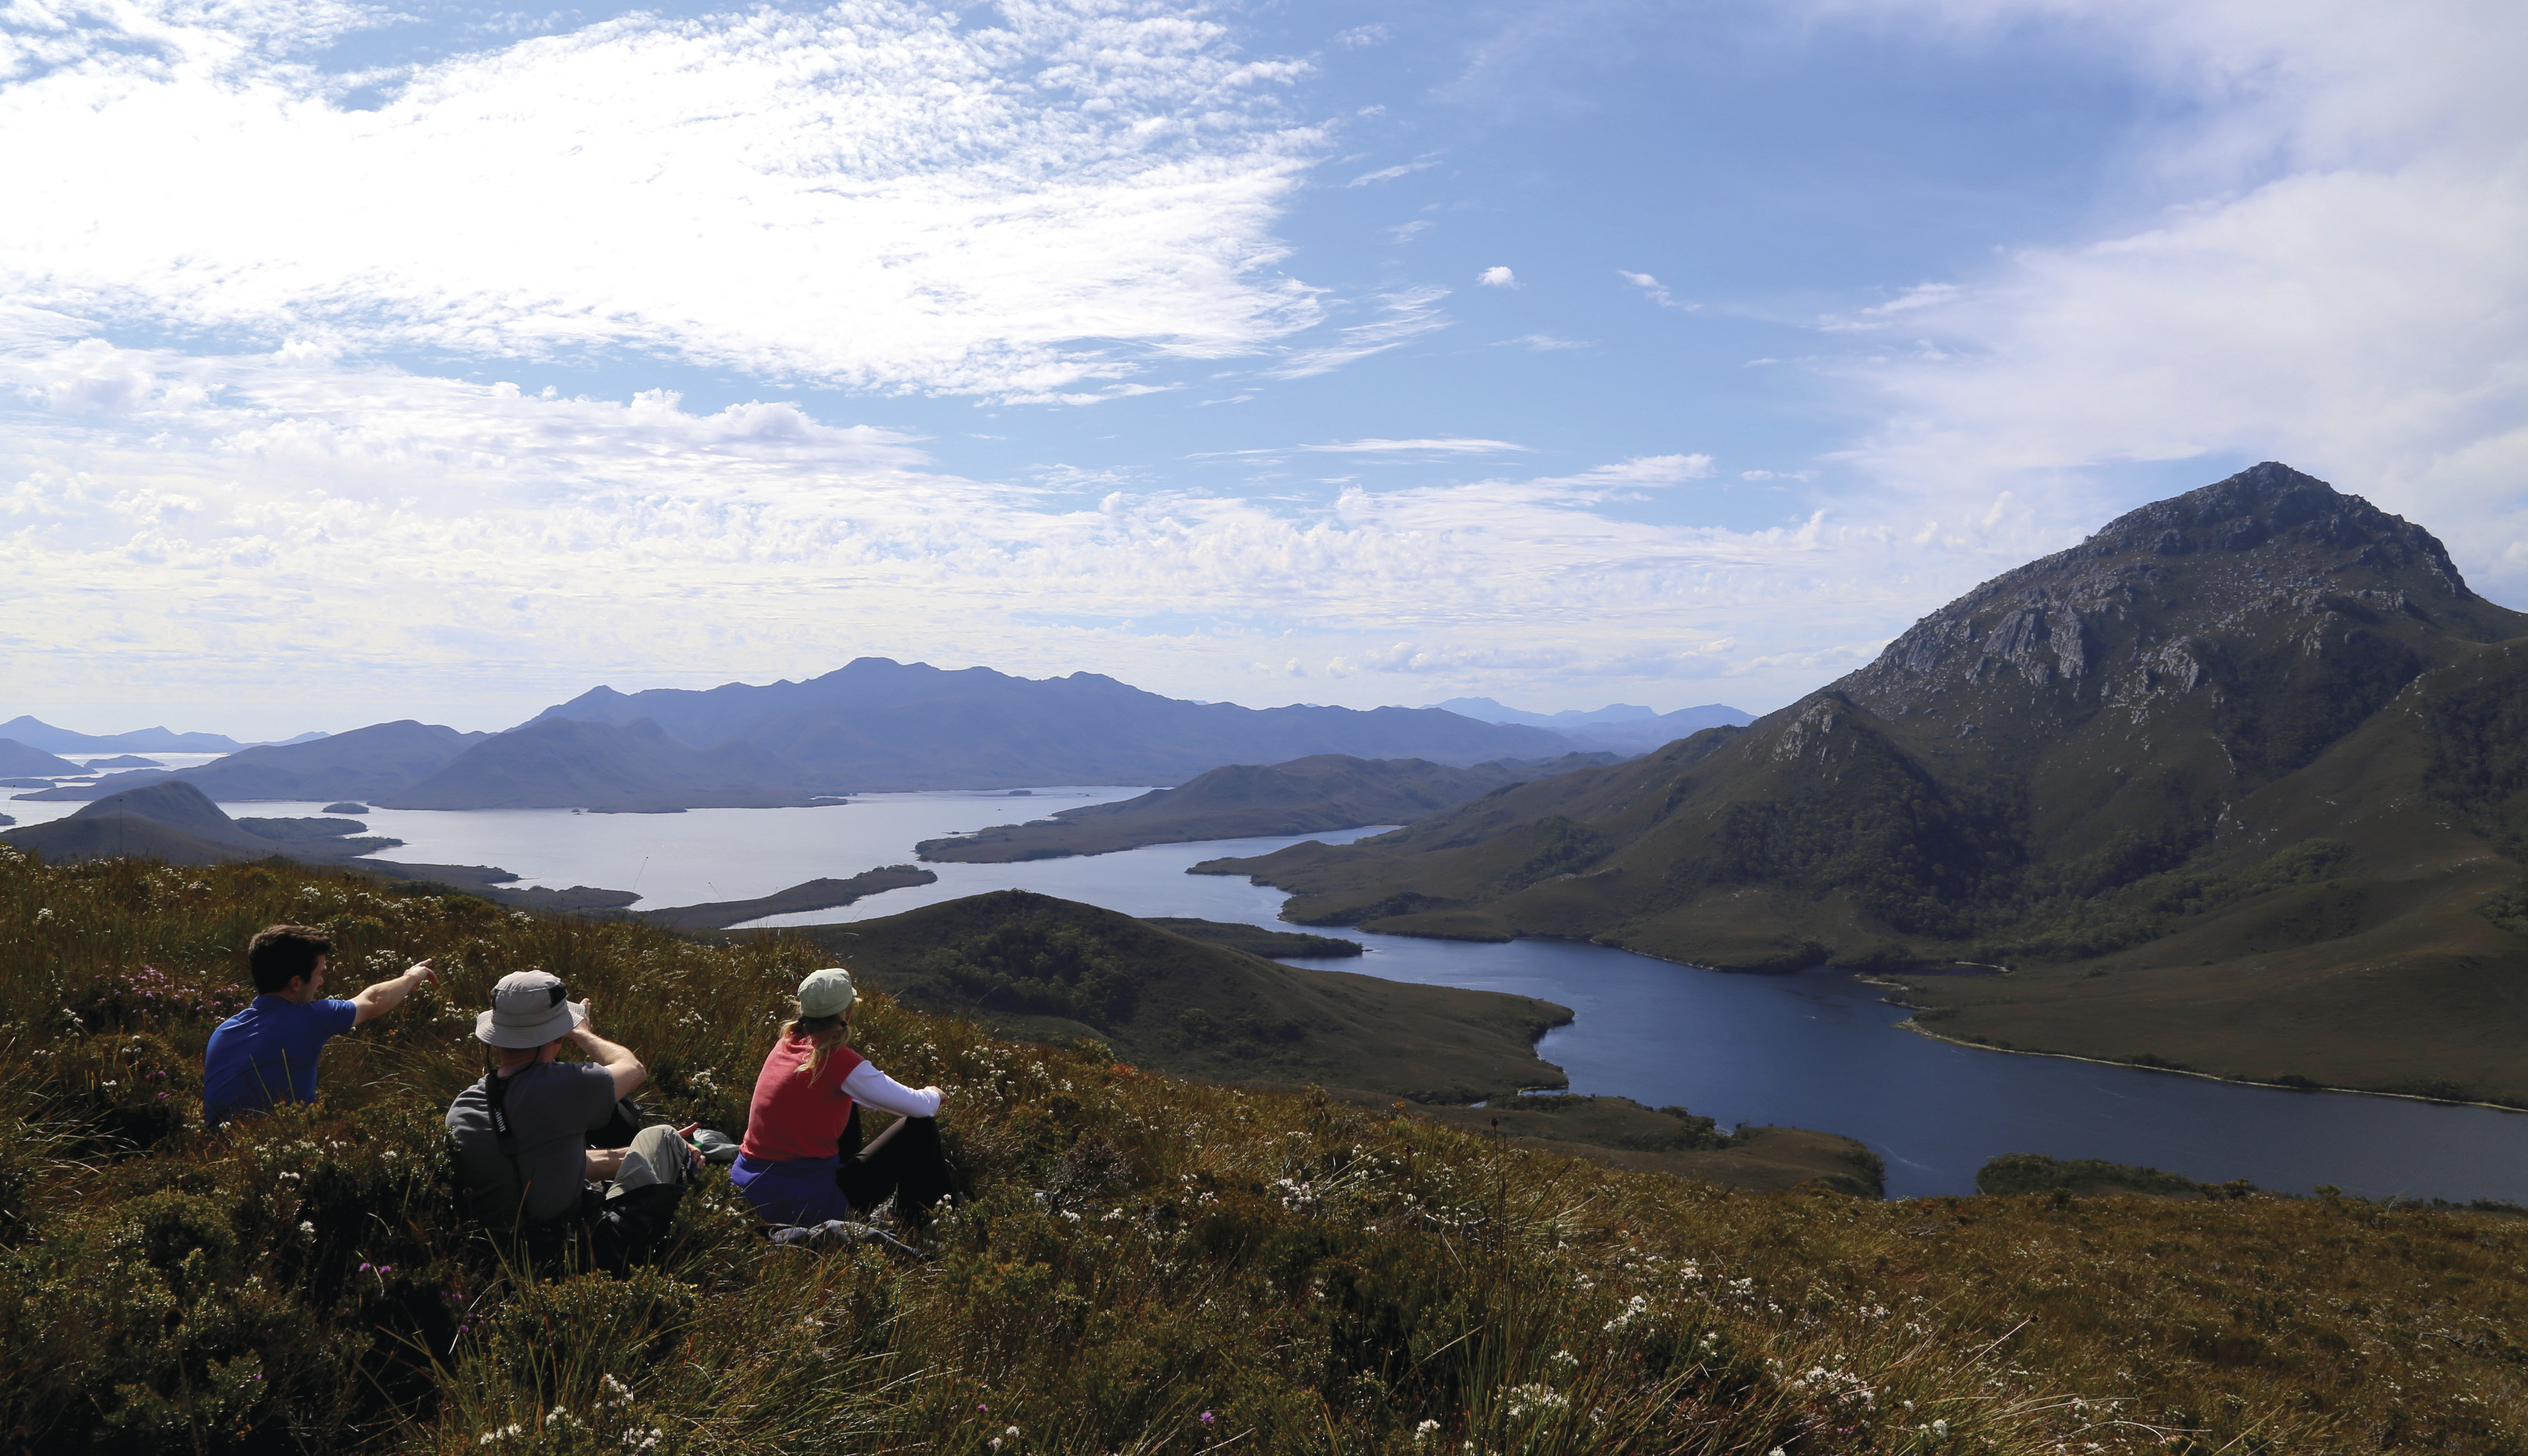 Three people taking a rest and exploring the incredibly remote waterways and wilderness of Bathurst Harbour/ Port Davey.